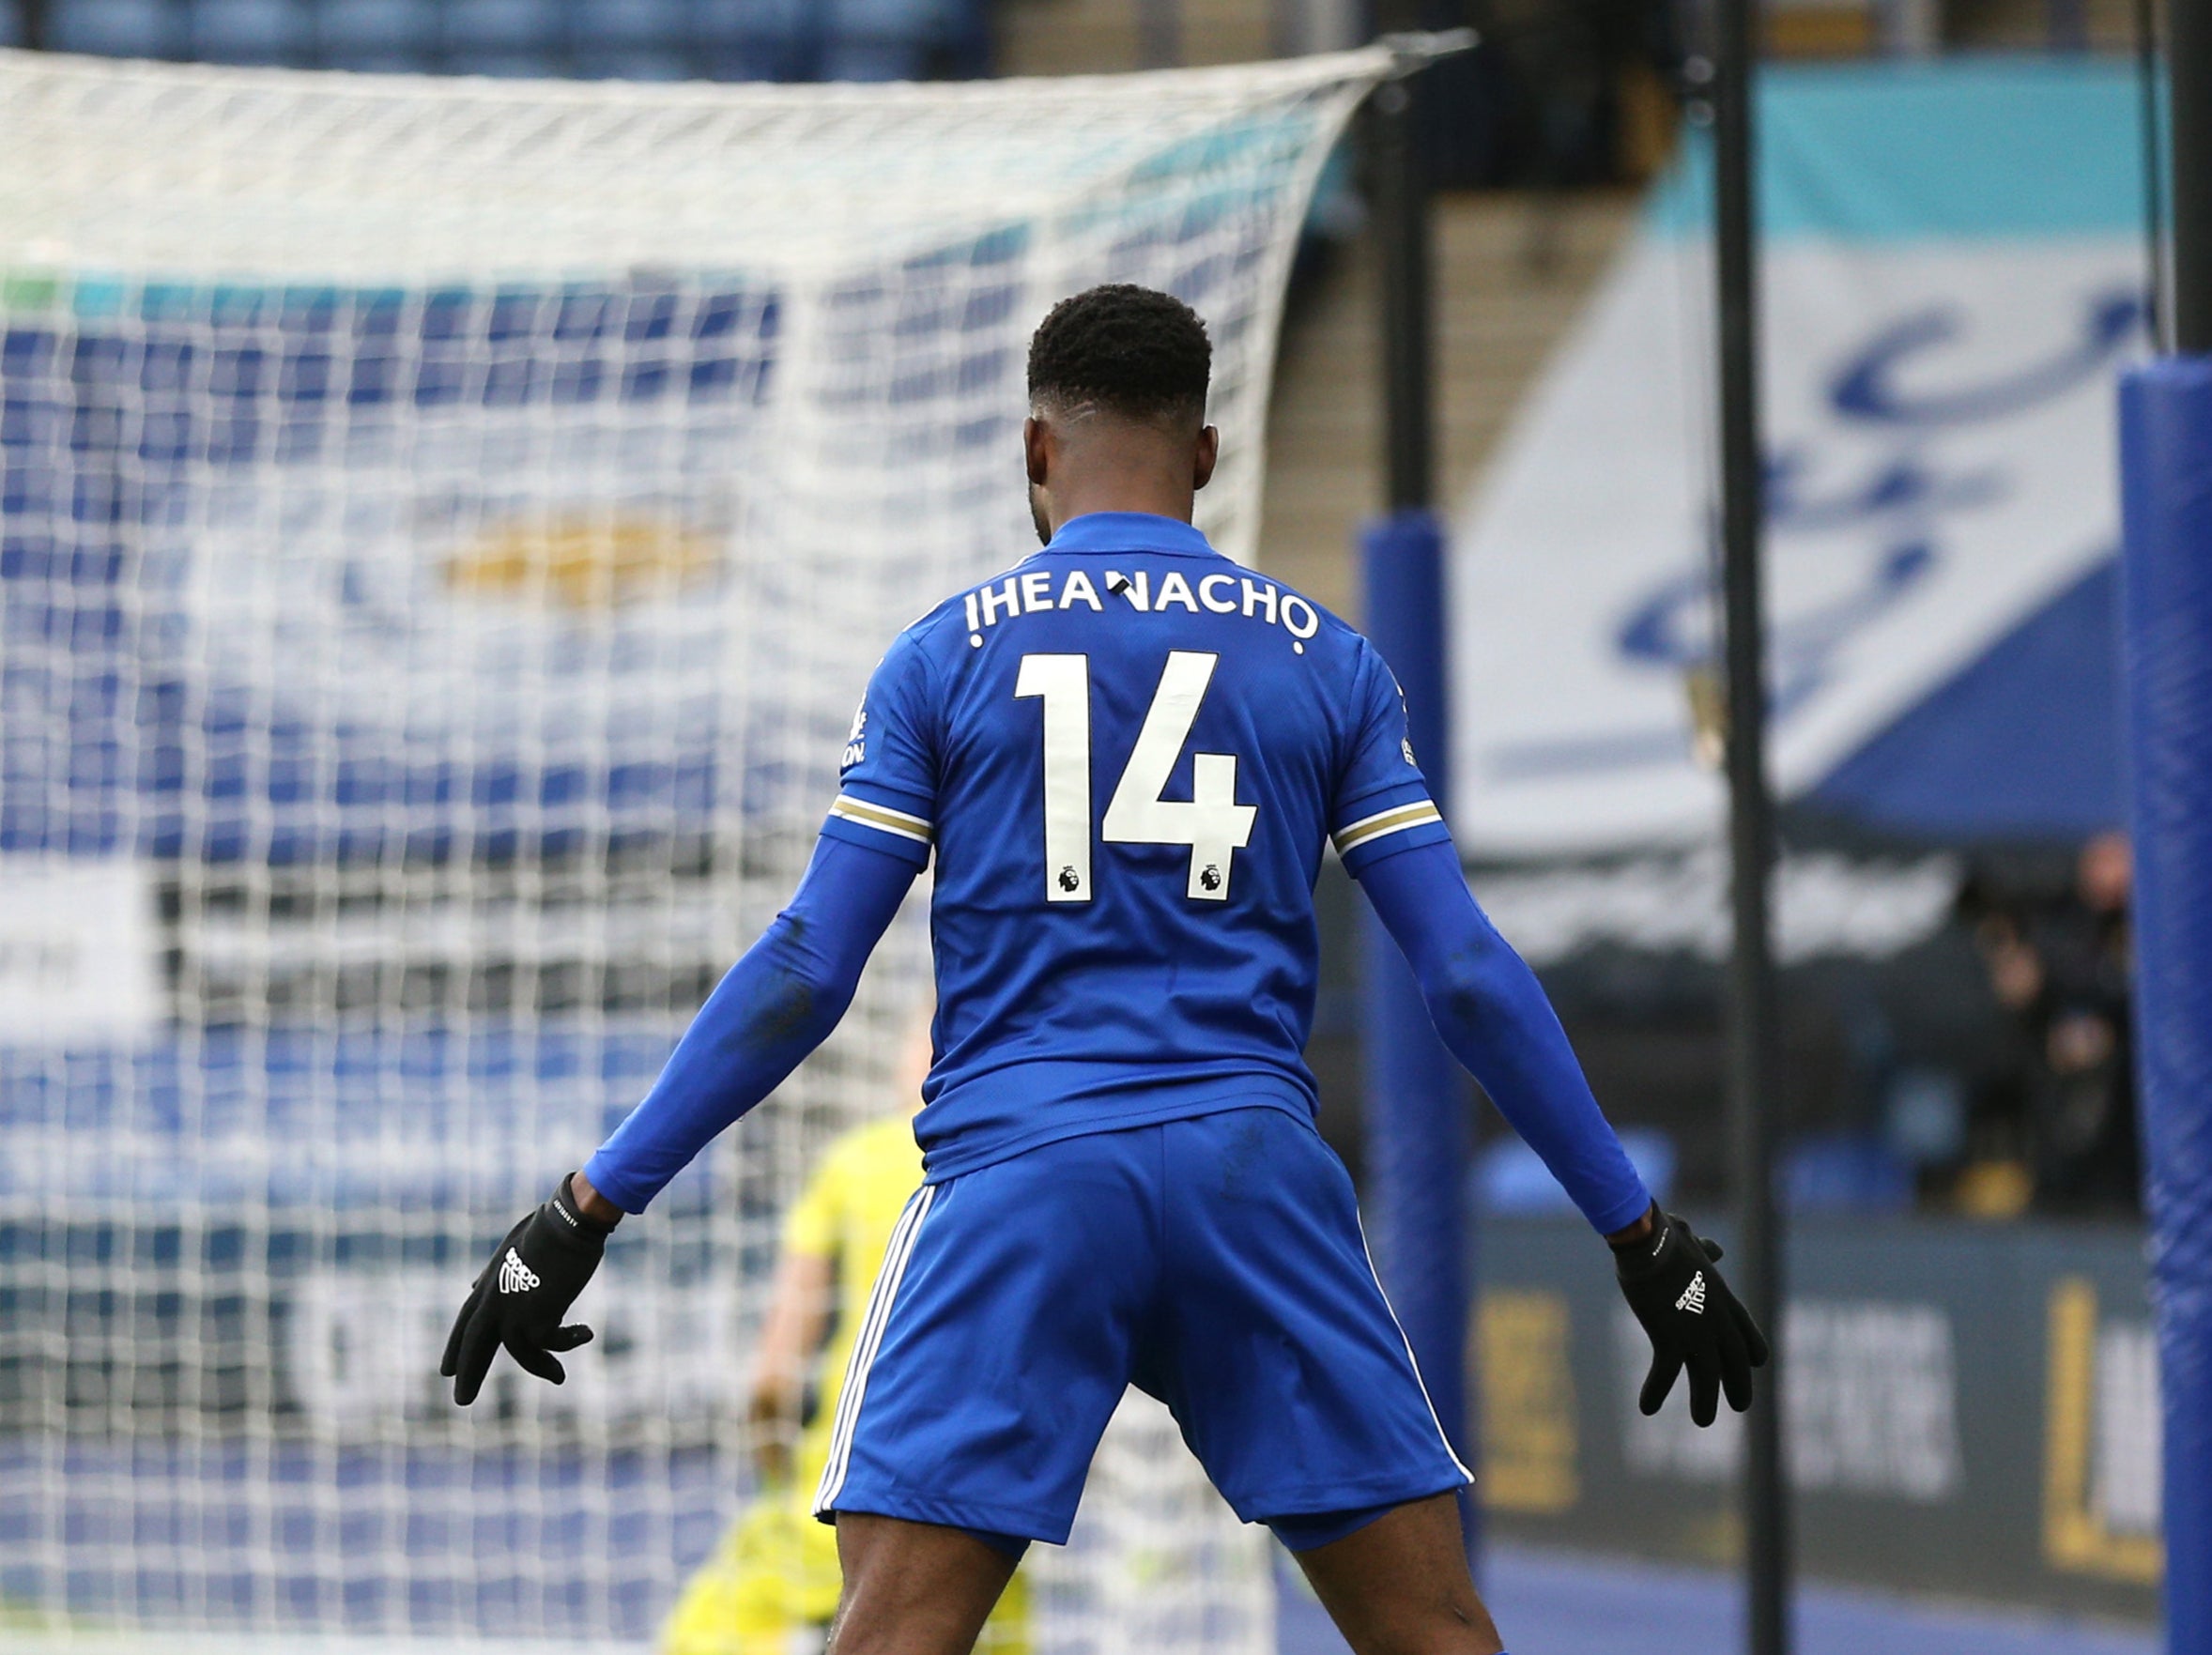 Leiceste's Kelechi Iheanacho was the Premier League’s player of the month for March